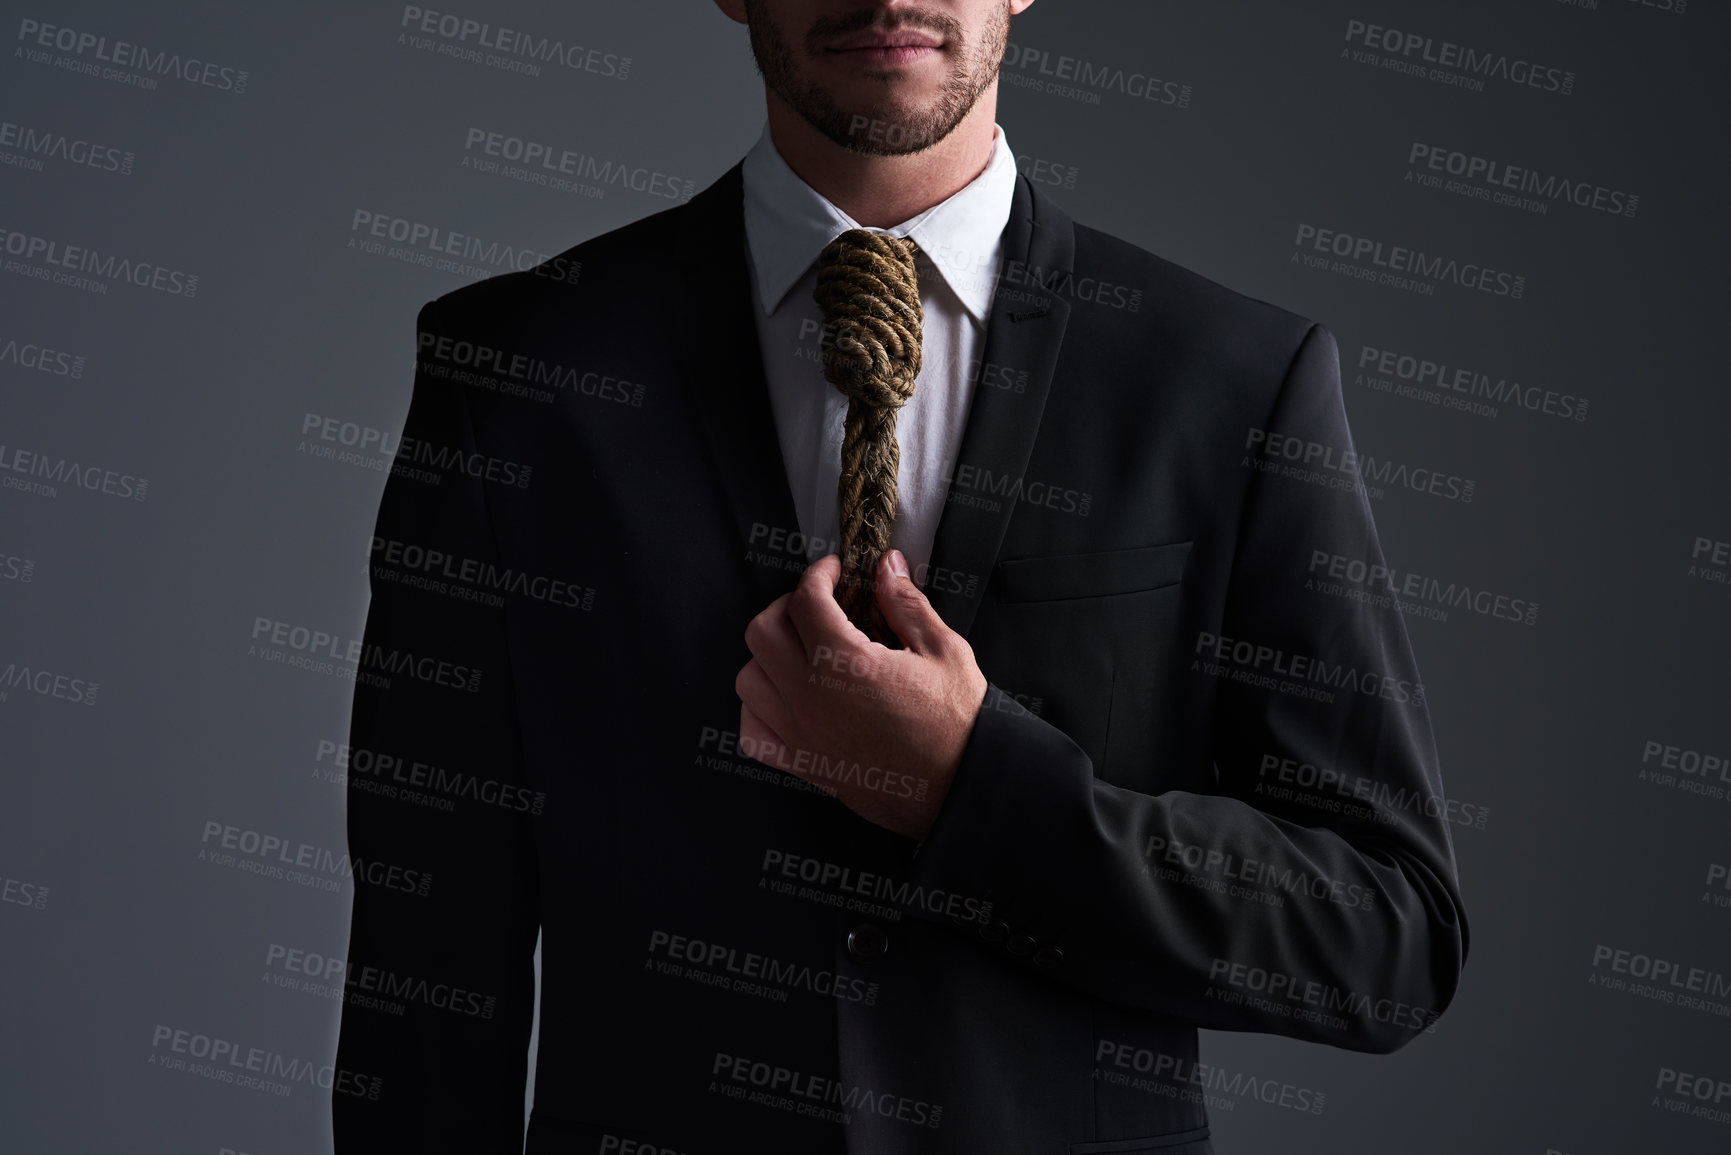 Buy stock photo Cropped studio shot of a businessman with a noose tied around his neck for a tie against a gray background